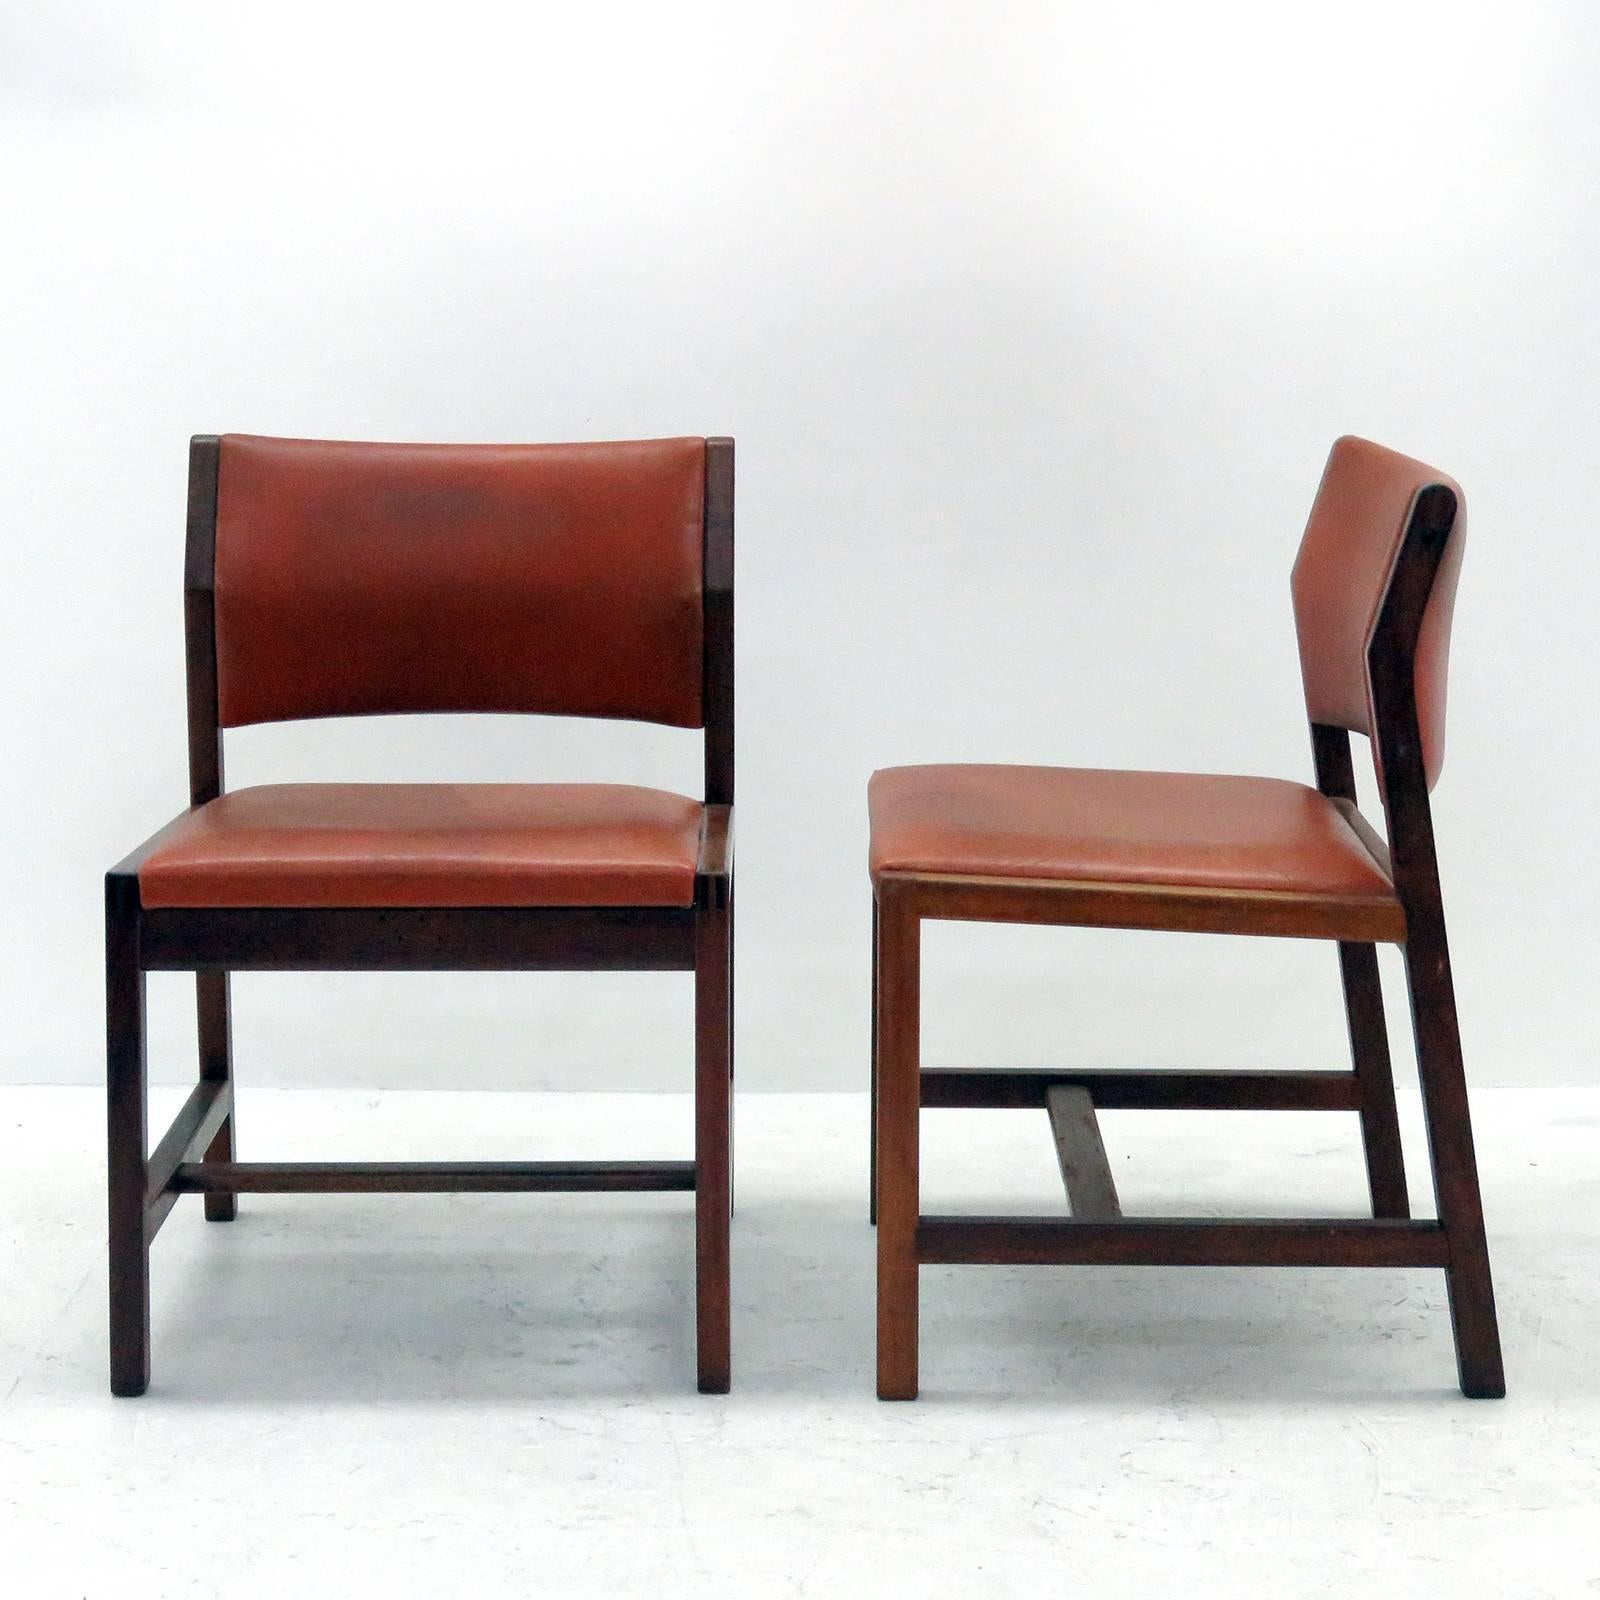 Wonderful Børge Mogensen 'BM72' Library chairs for Frederica A/S, Denmark, in red ocher leather on a mahogany frame. Priced individually.